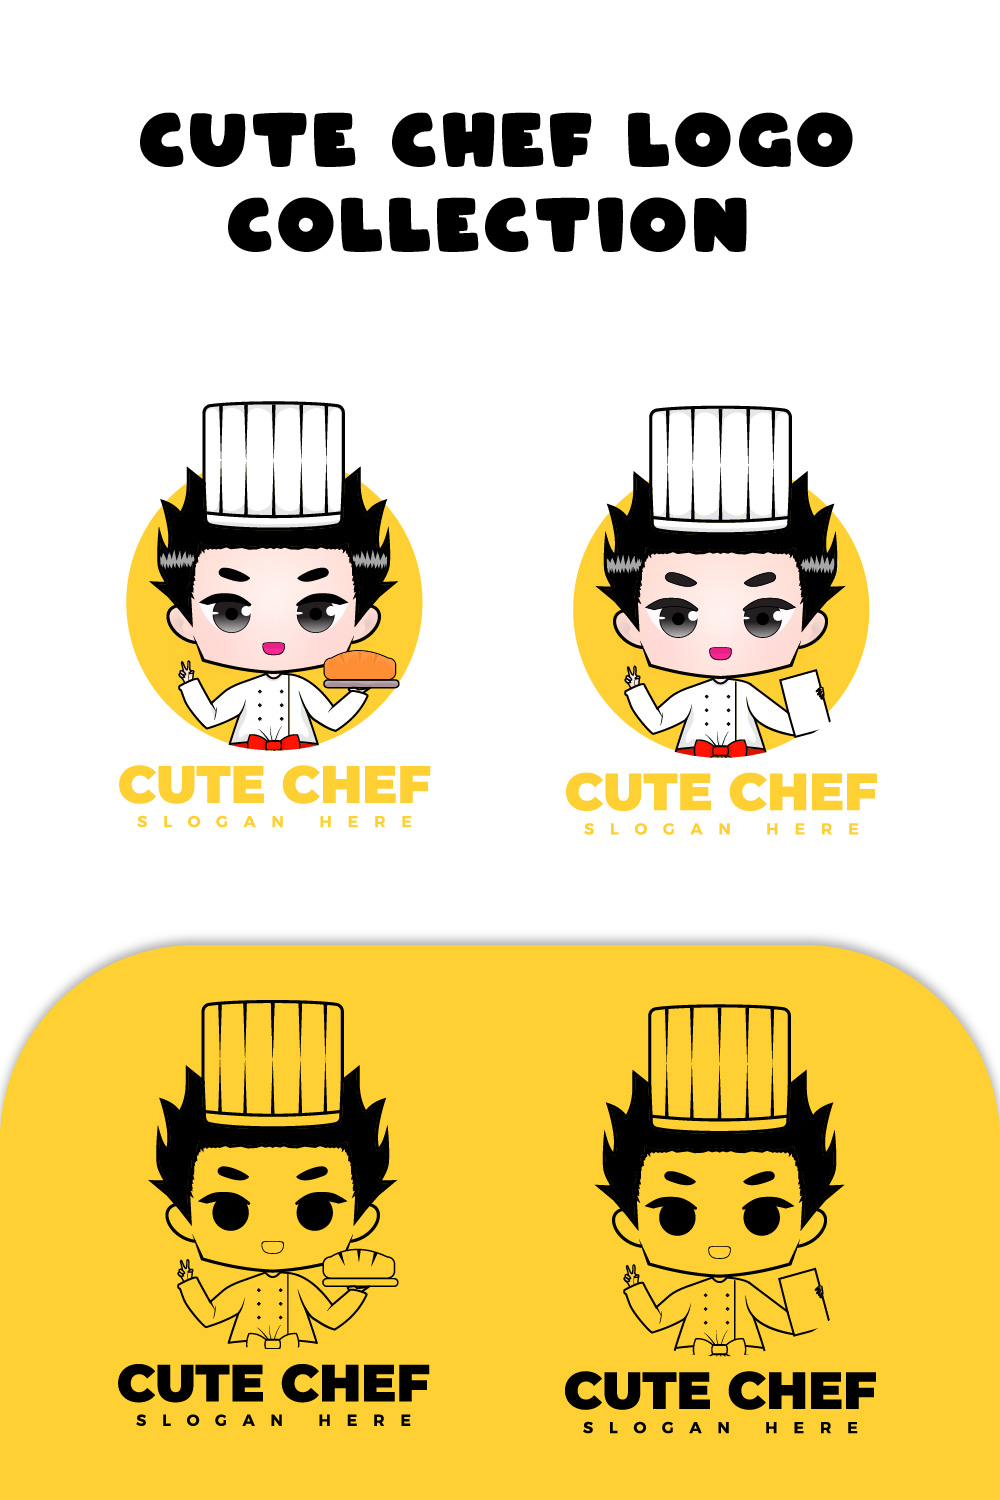 Cute Chef Character Logo Collection pinterest preview.